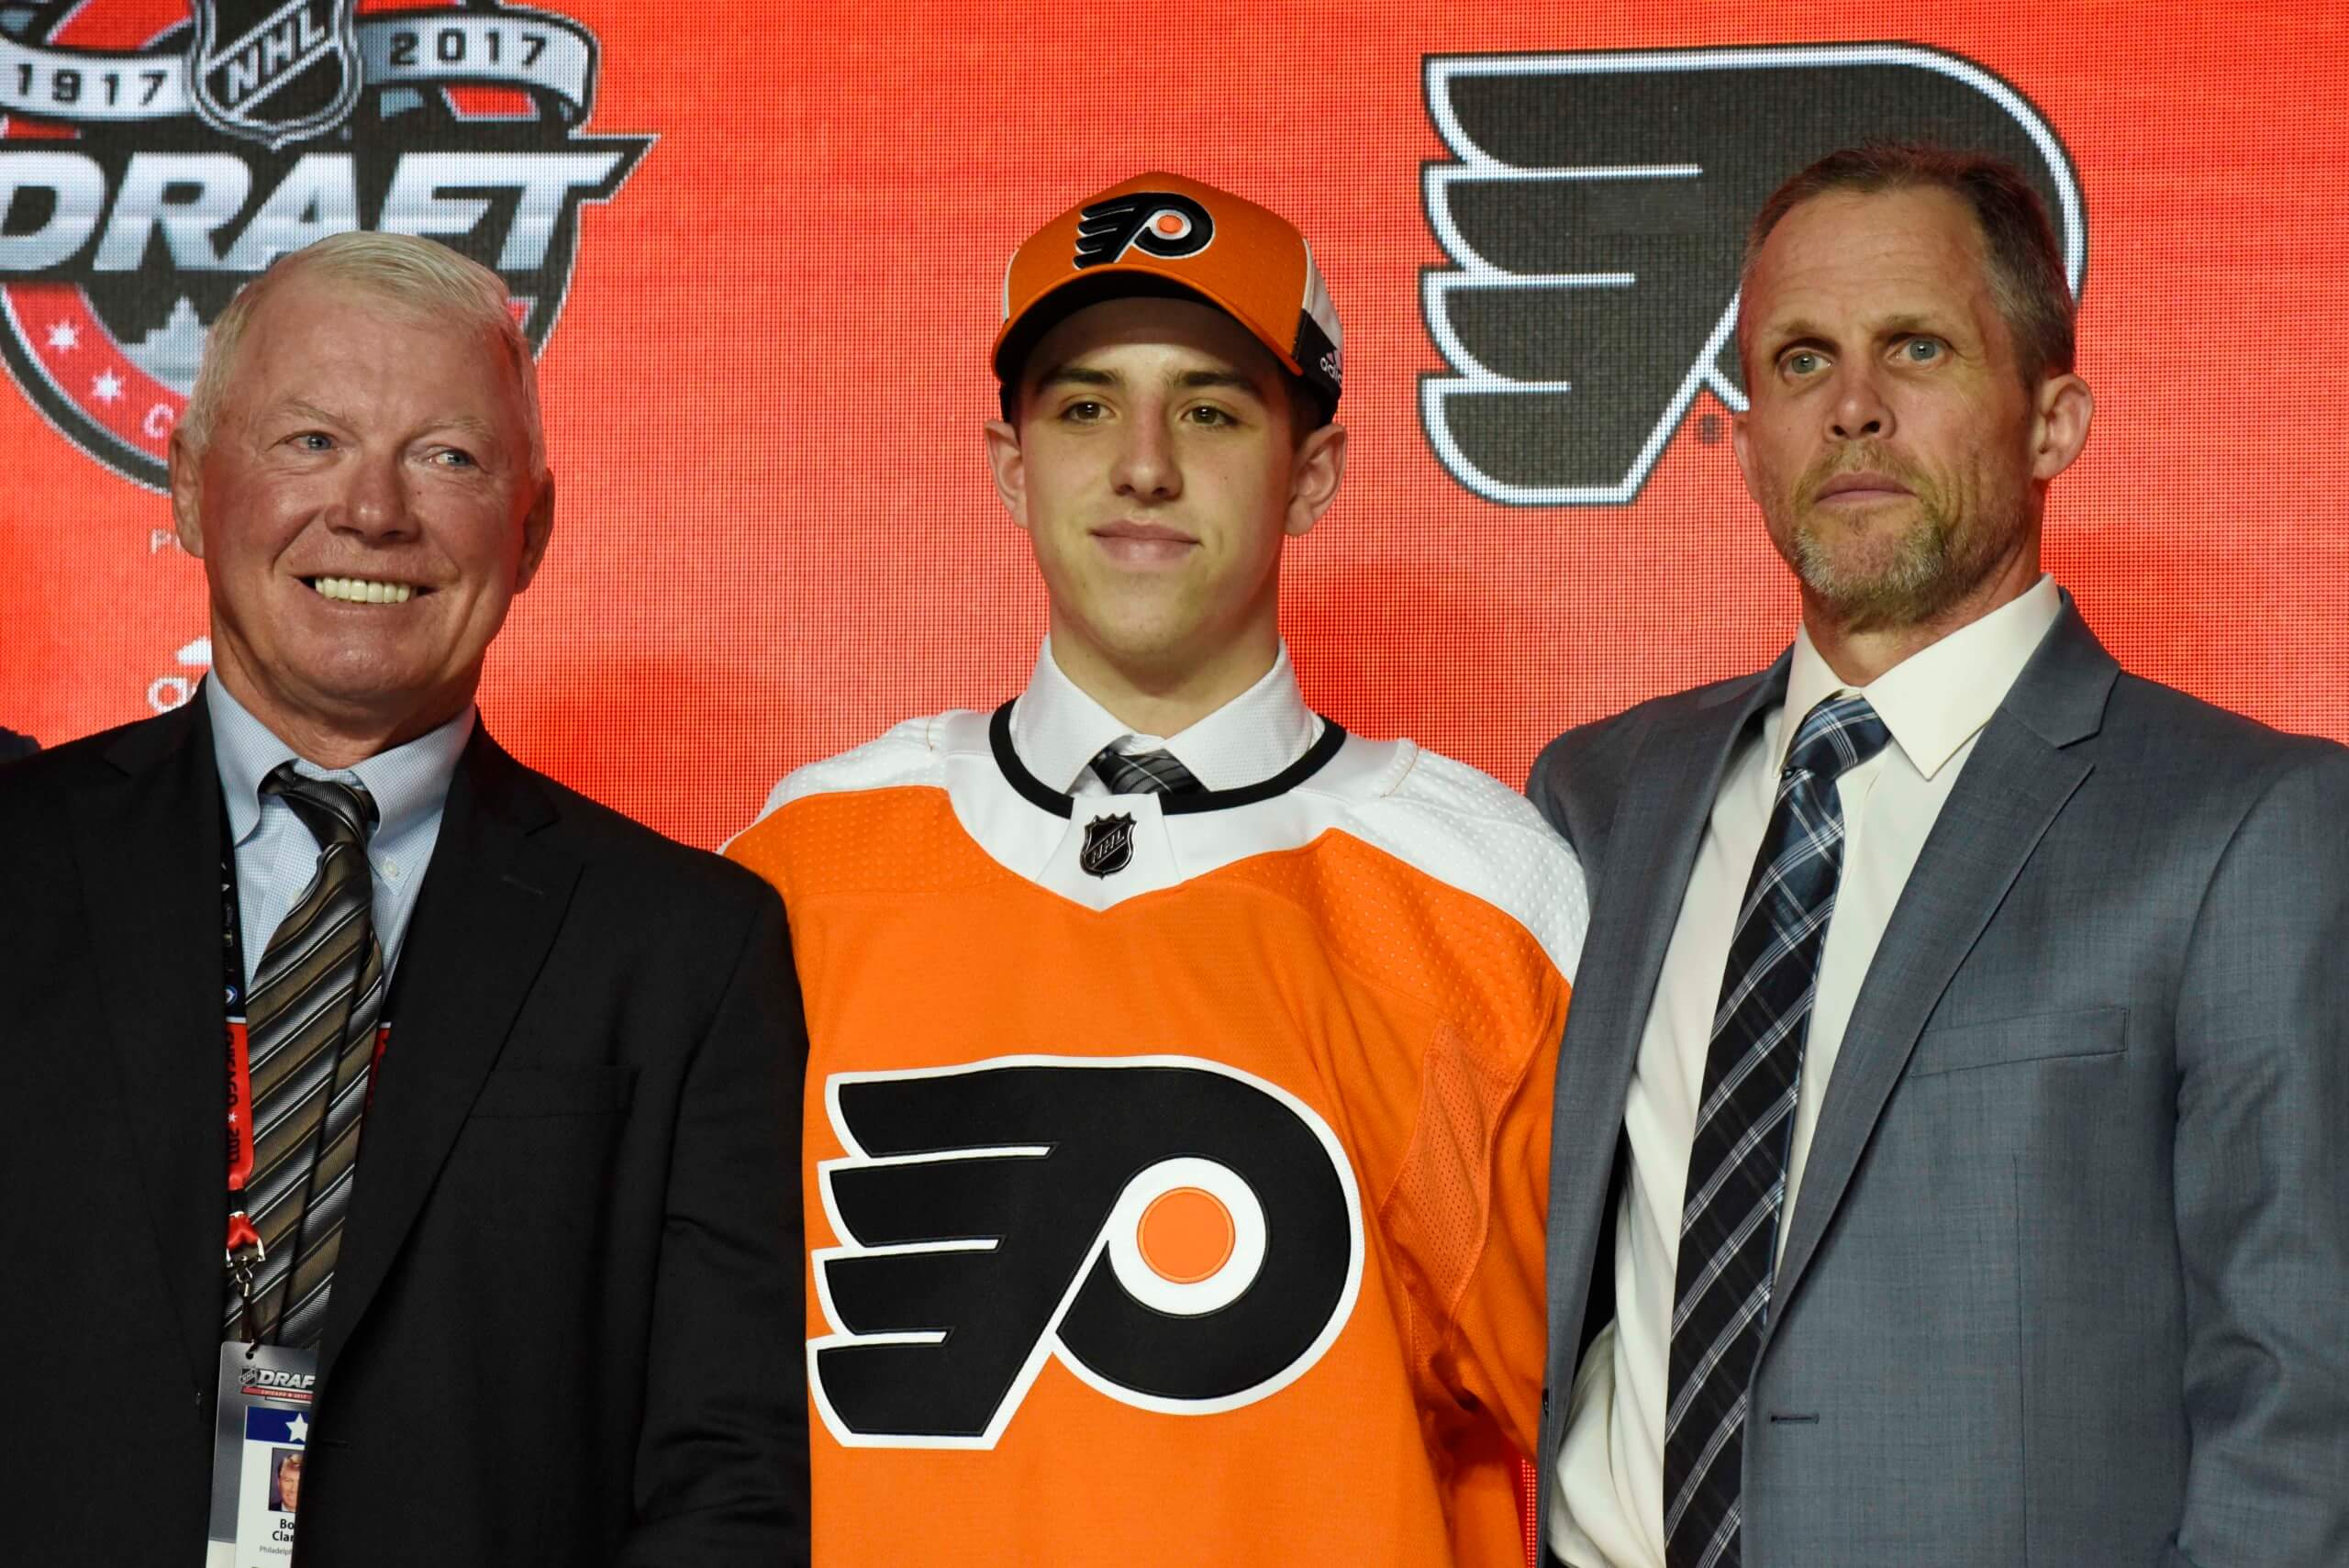 What's the quality & depth of Philadelphia's current farm system?, Locked  On Flyers